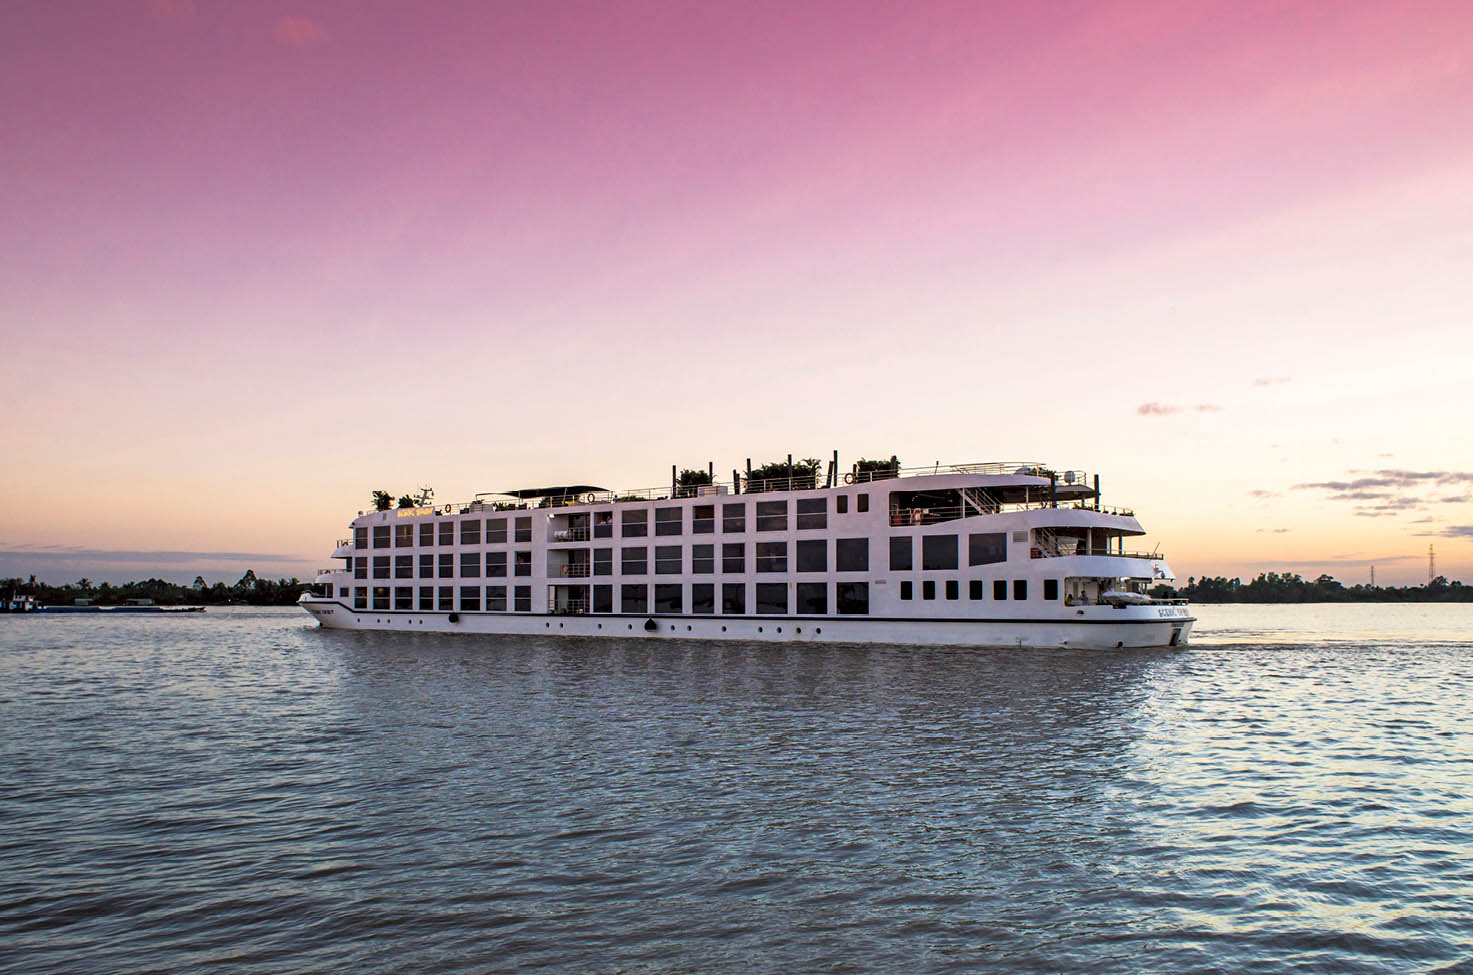 river cruise ship under a pink sunset